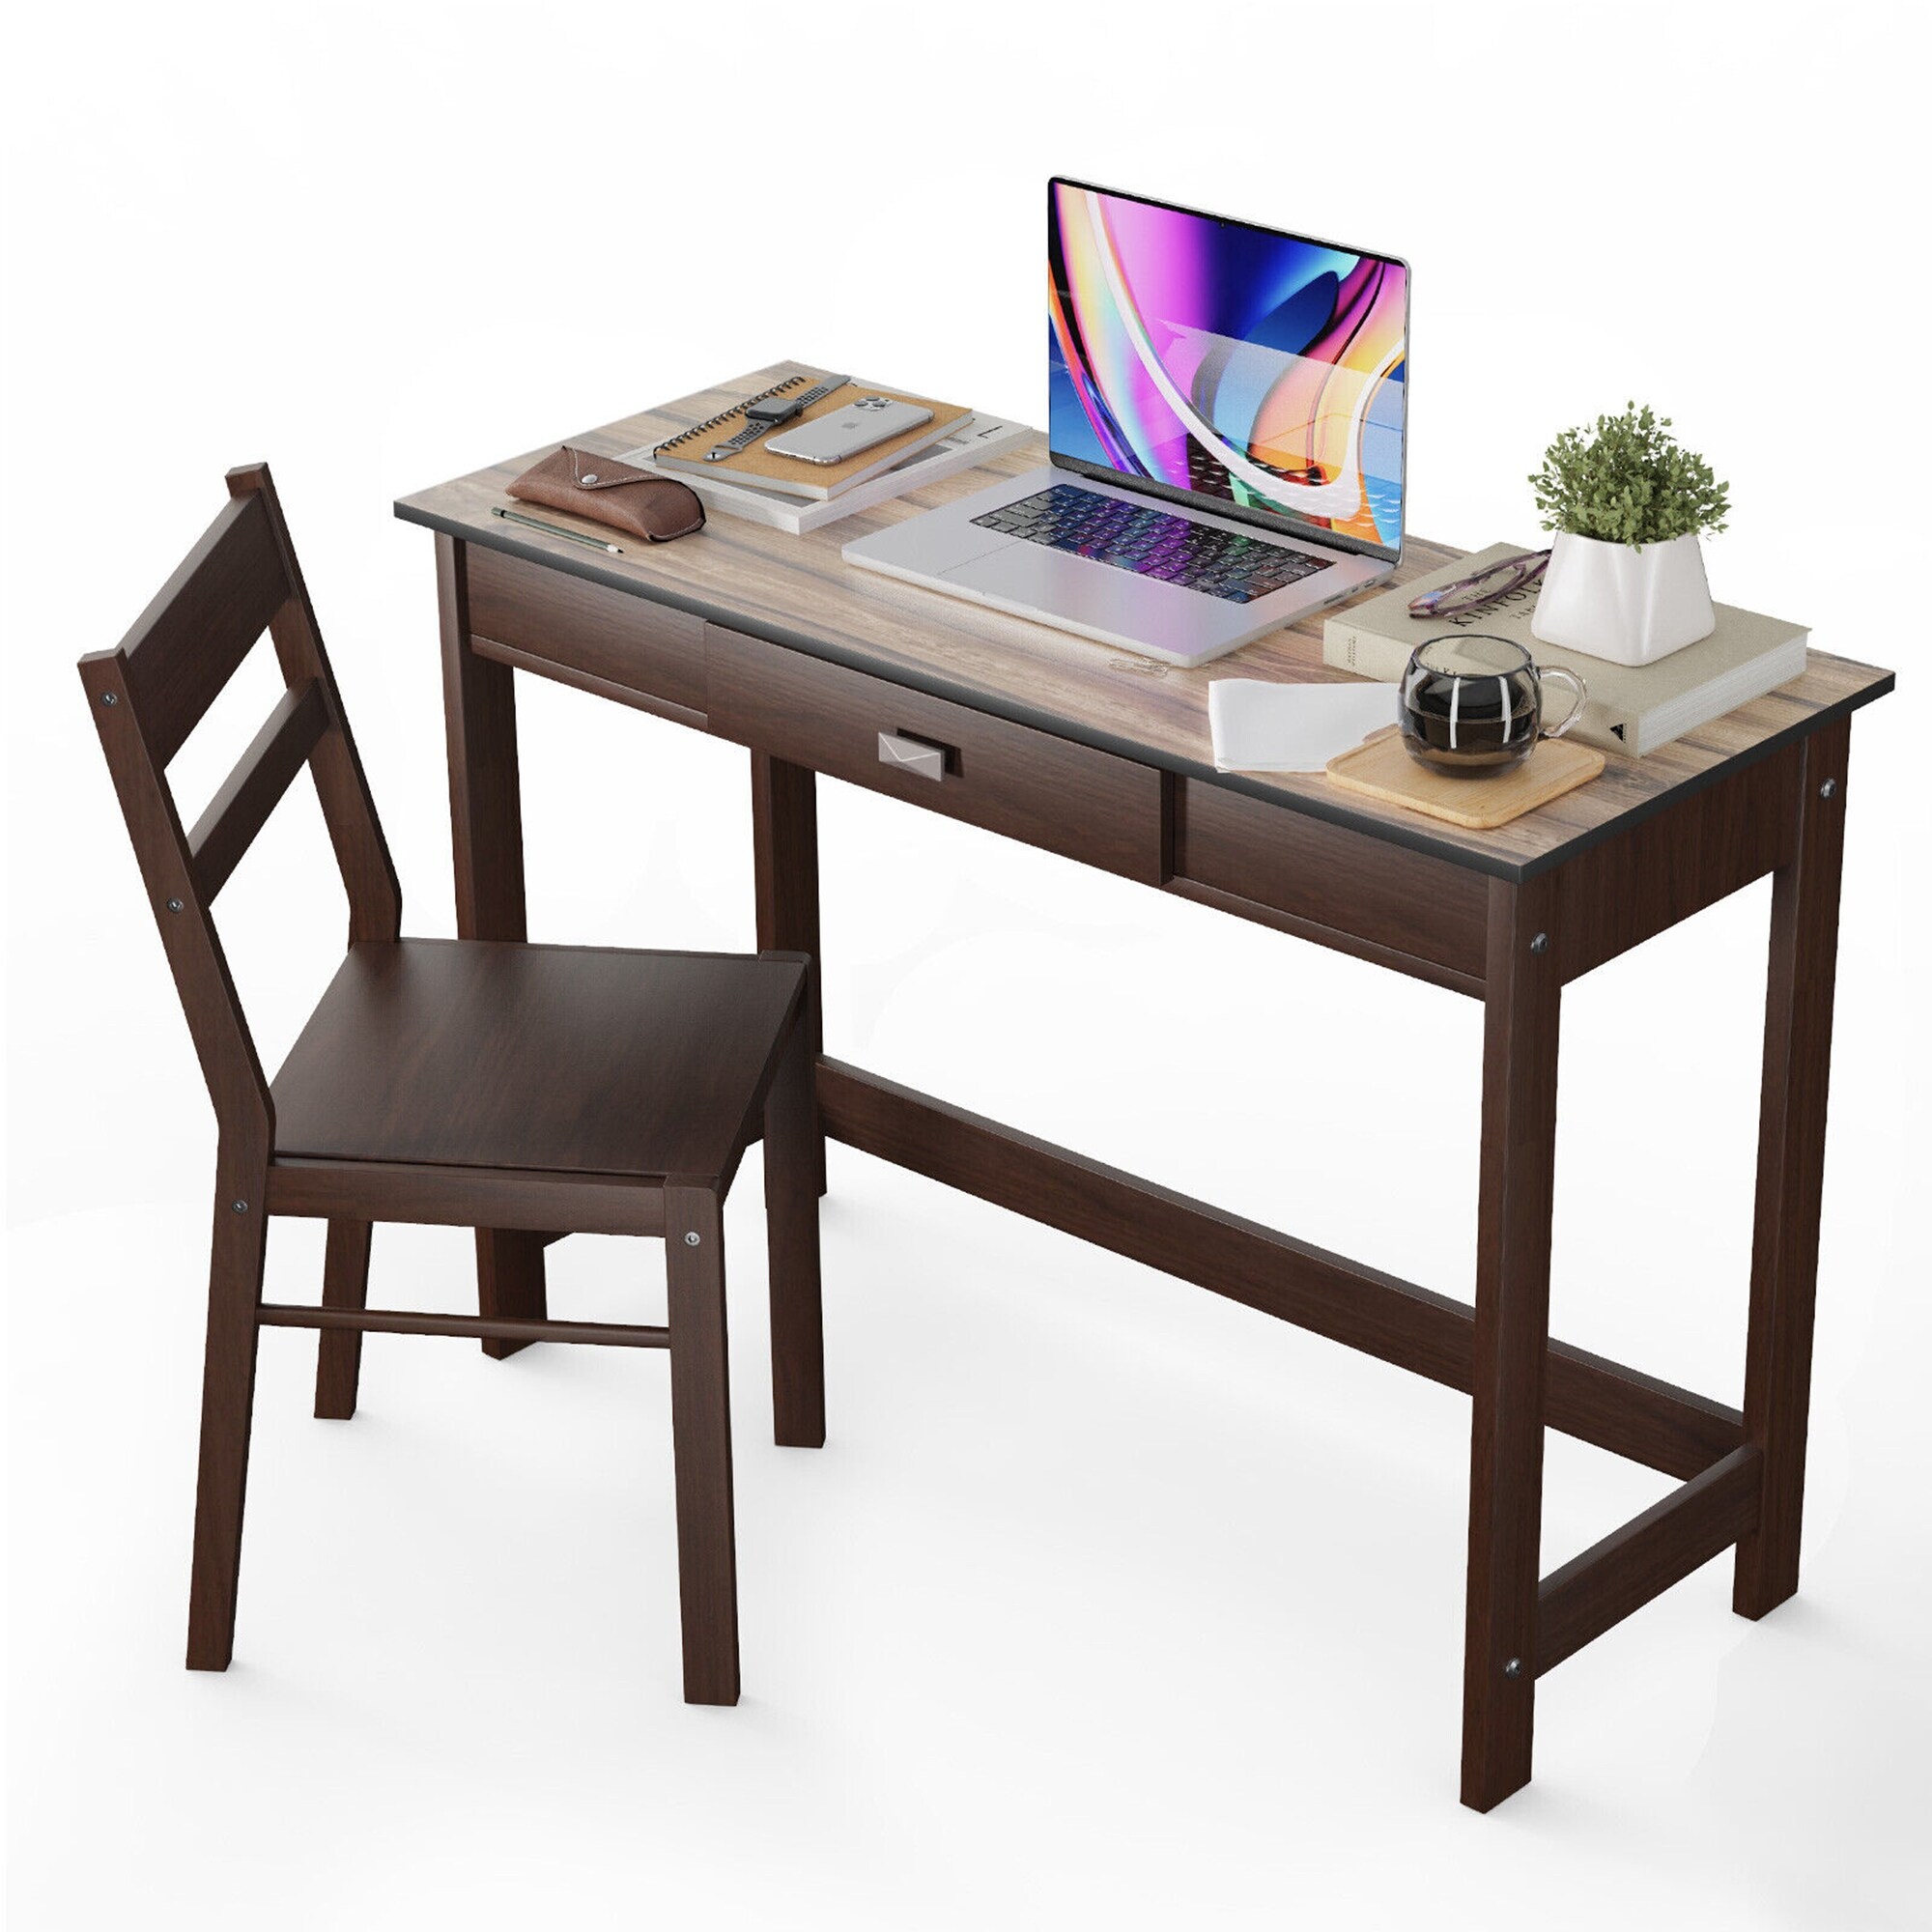 https://ak1.ostkcdn.com/images/products/is/images/direct/7e2f131b26091464f7d6ef8e4e8e9d4ddd66d7bd/Gymax-Kids-Desk-%26-Chair-Set-Study-Table-Writing-Workstation-w--Drawer.jpg